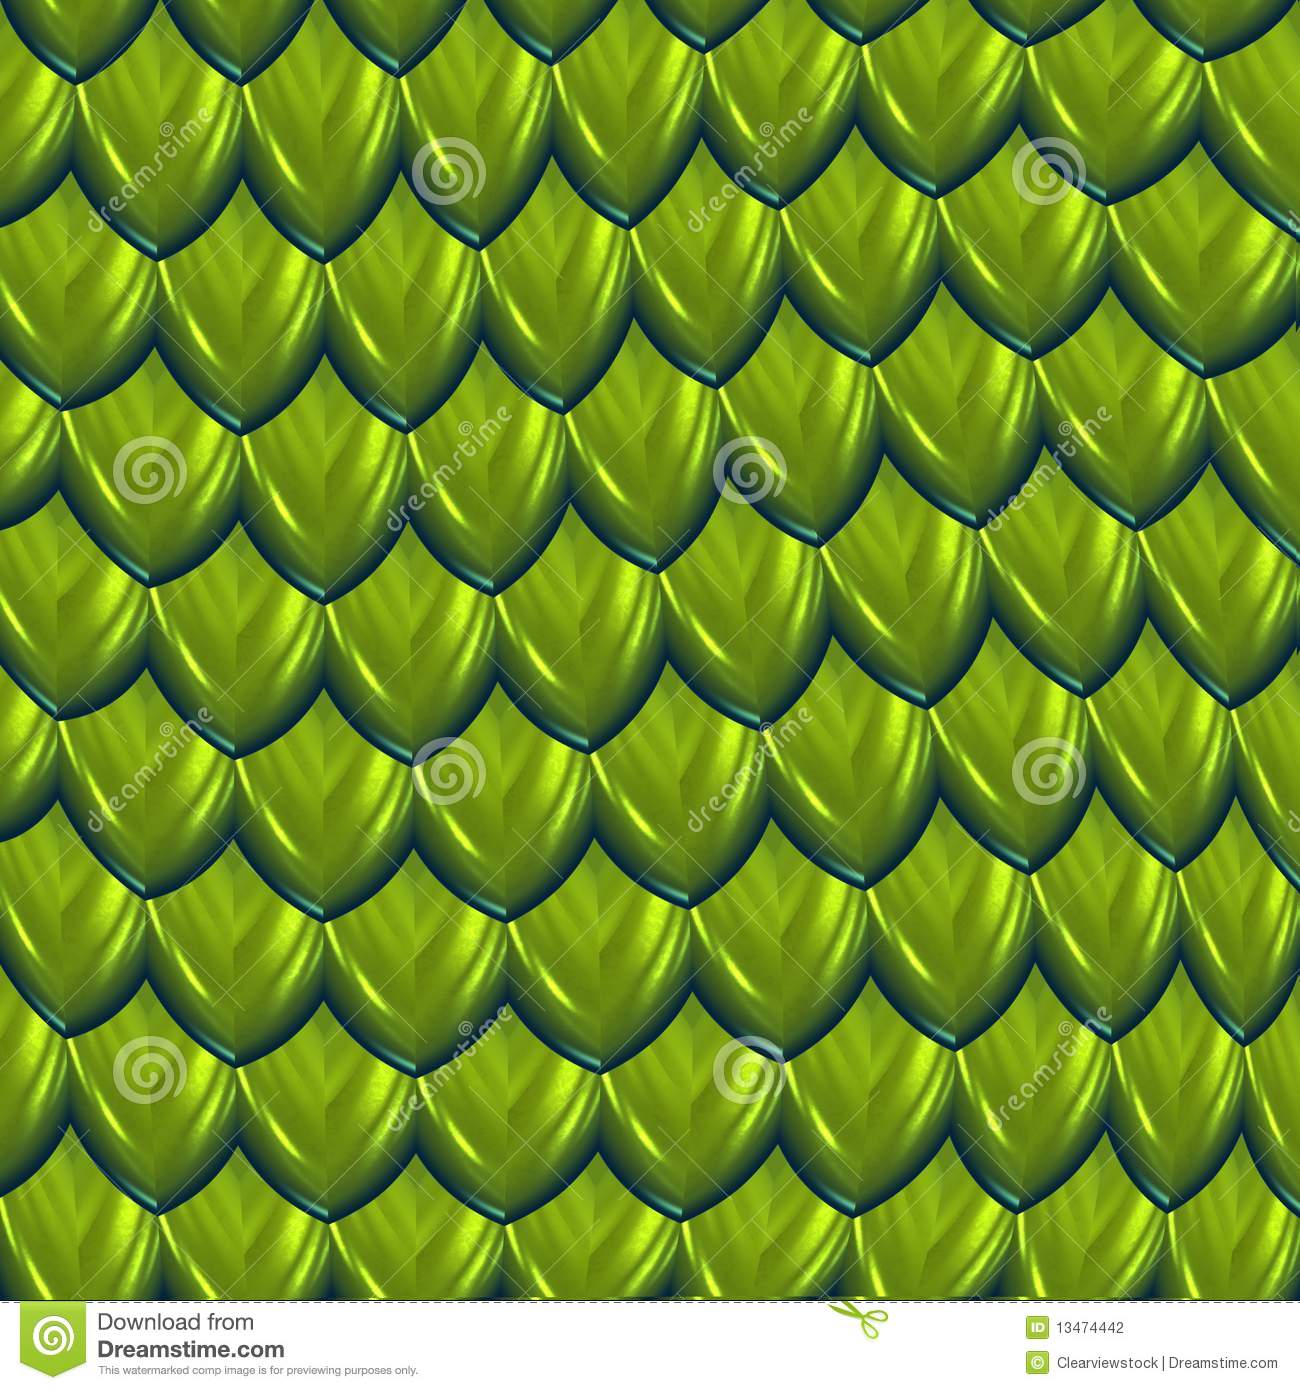 More Similar Stock Images Of   Dragon Skin Green Scales Background